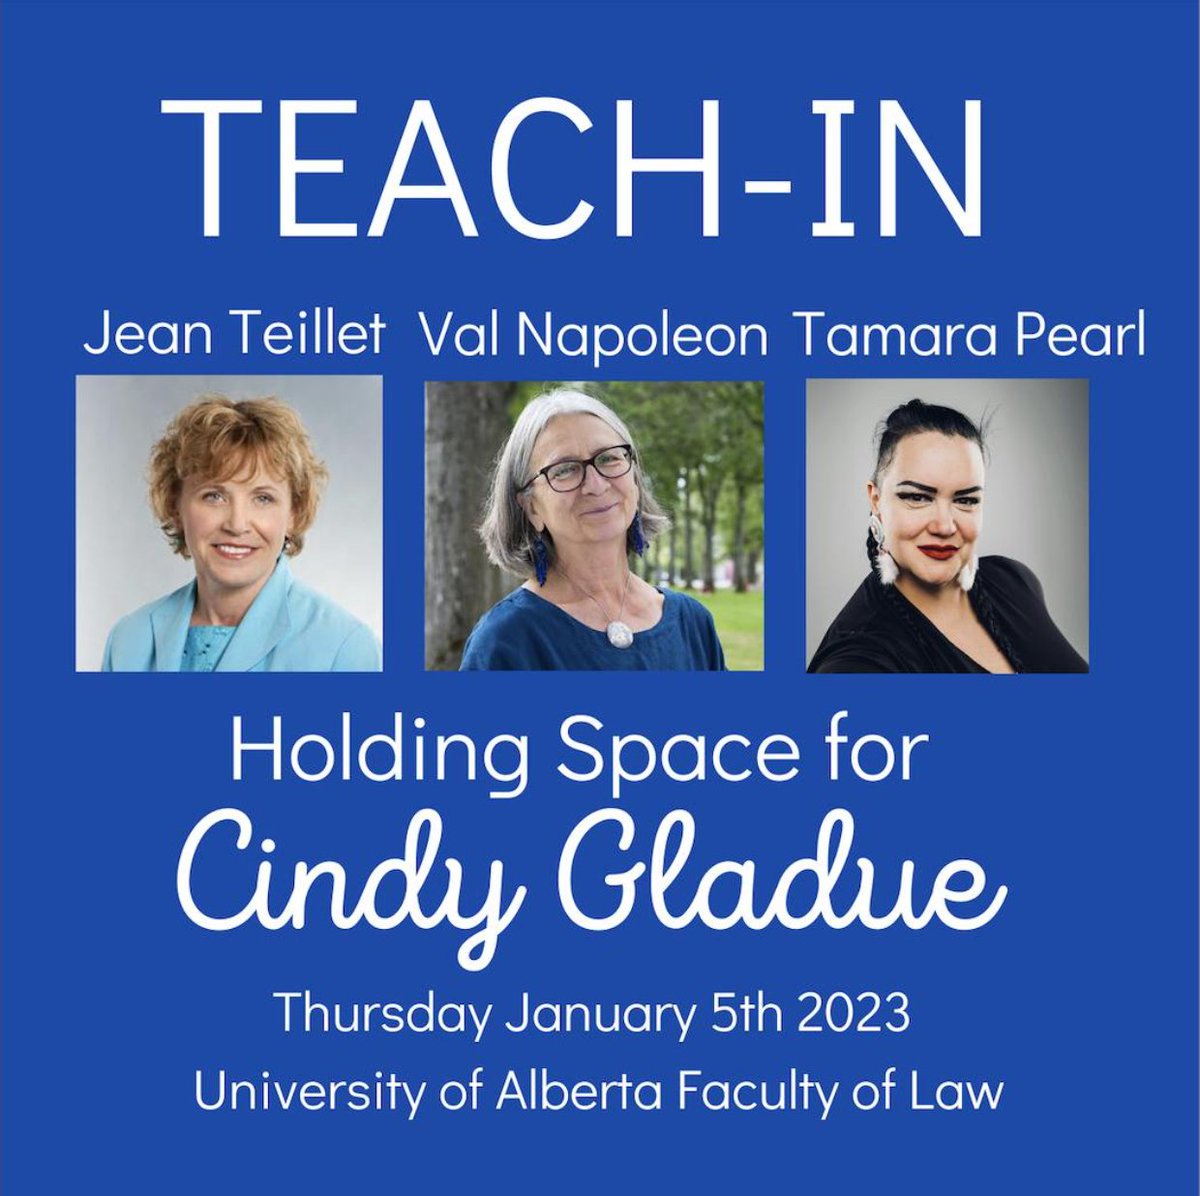 On Thursday WLGL & Standing Together were honoured to hold space again for Cindy Gladue & her family, raising awareness about MMIW and the legal system. Thanks to @jeanteillet Val Napoleon & @TamaraPearl5 for speaking at the Teach-In, now @ WLGL YouTube: youtu.be/JNJ1Q8yPHpo